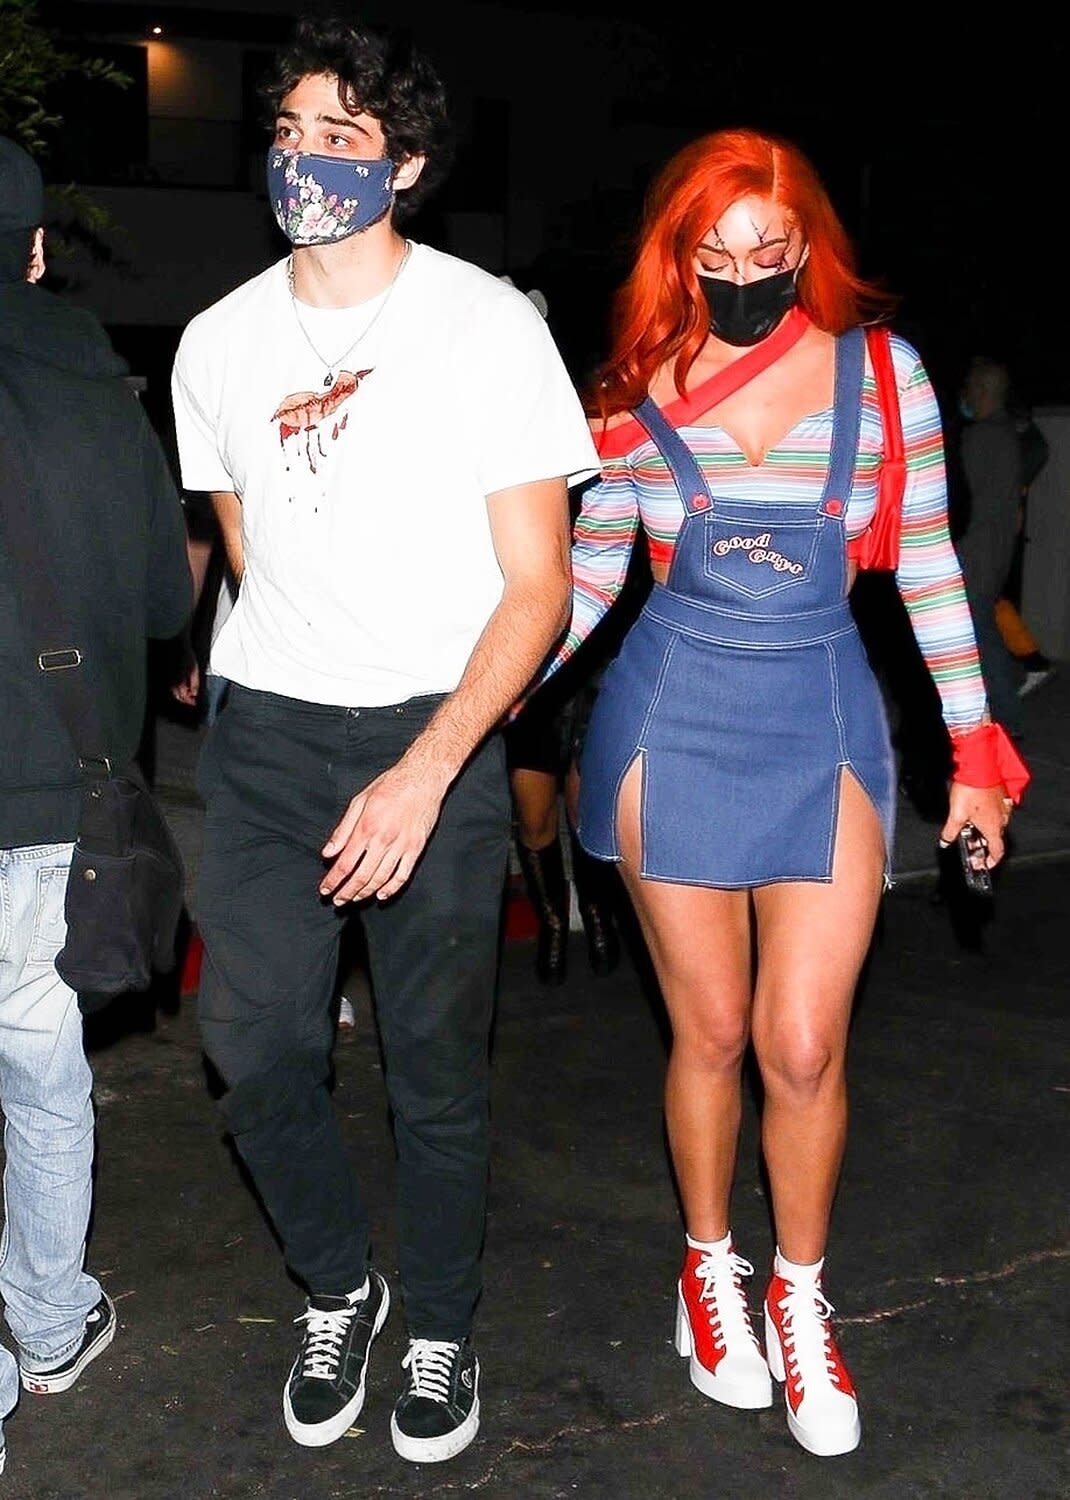 Noah Centineo And Stassie Karanikolaou Hold Hands While Celebrating Halloween Together